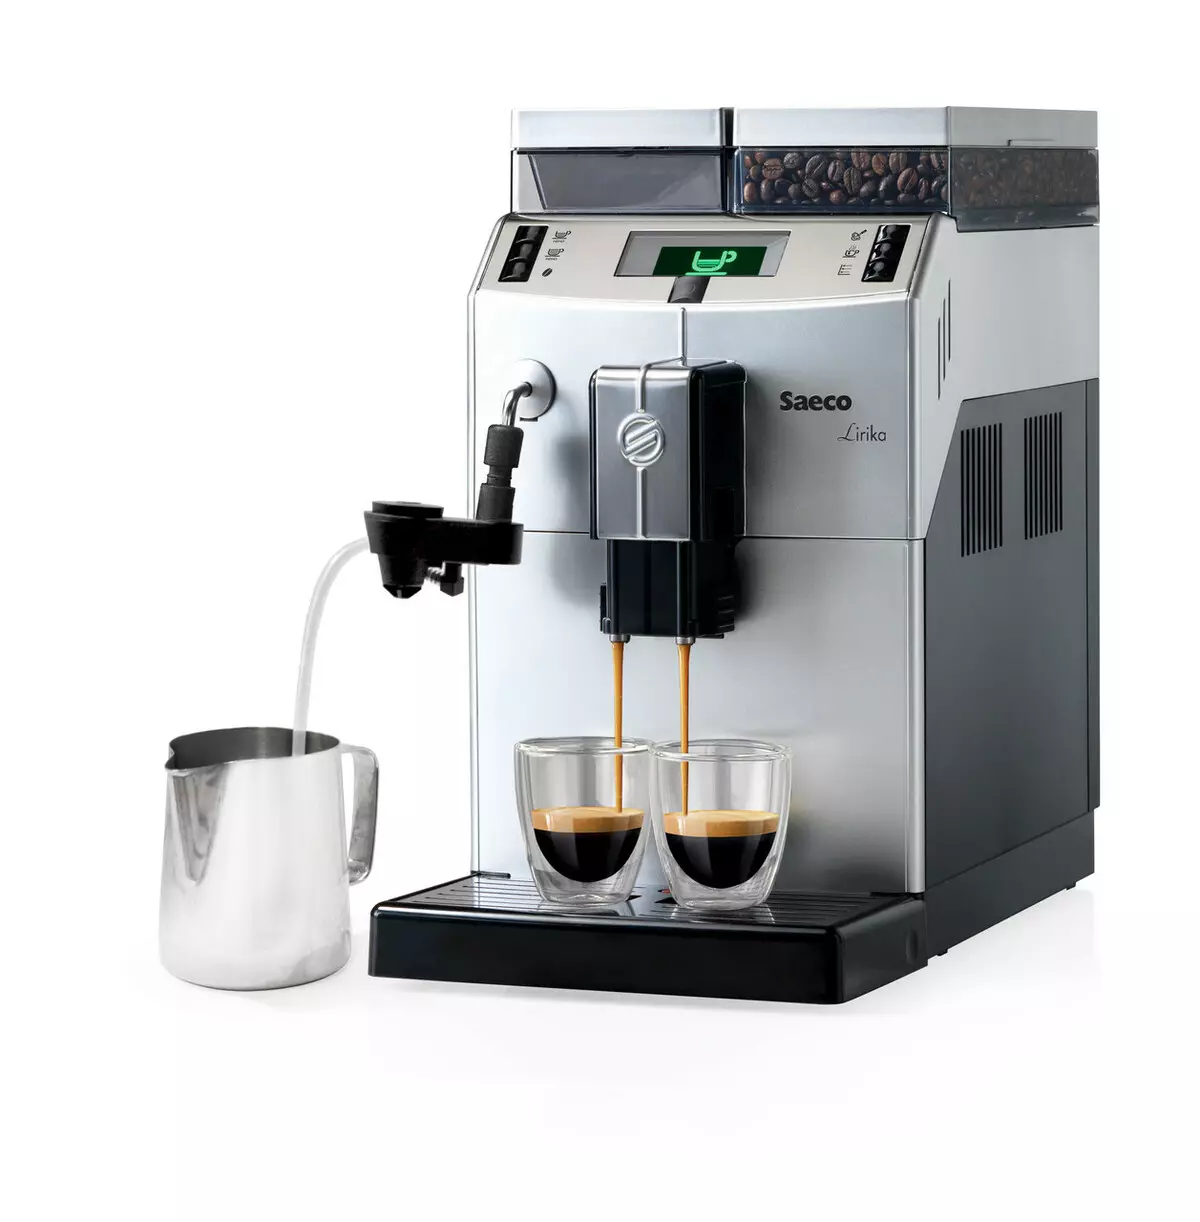 What is important to know about the repair of Saeco coffee machines?